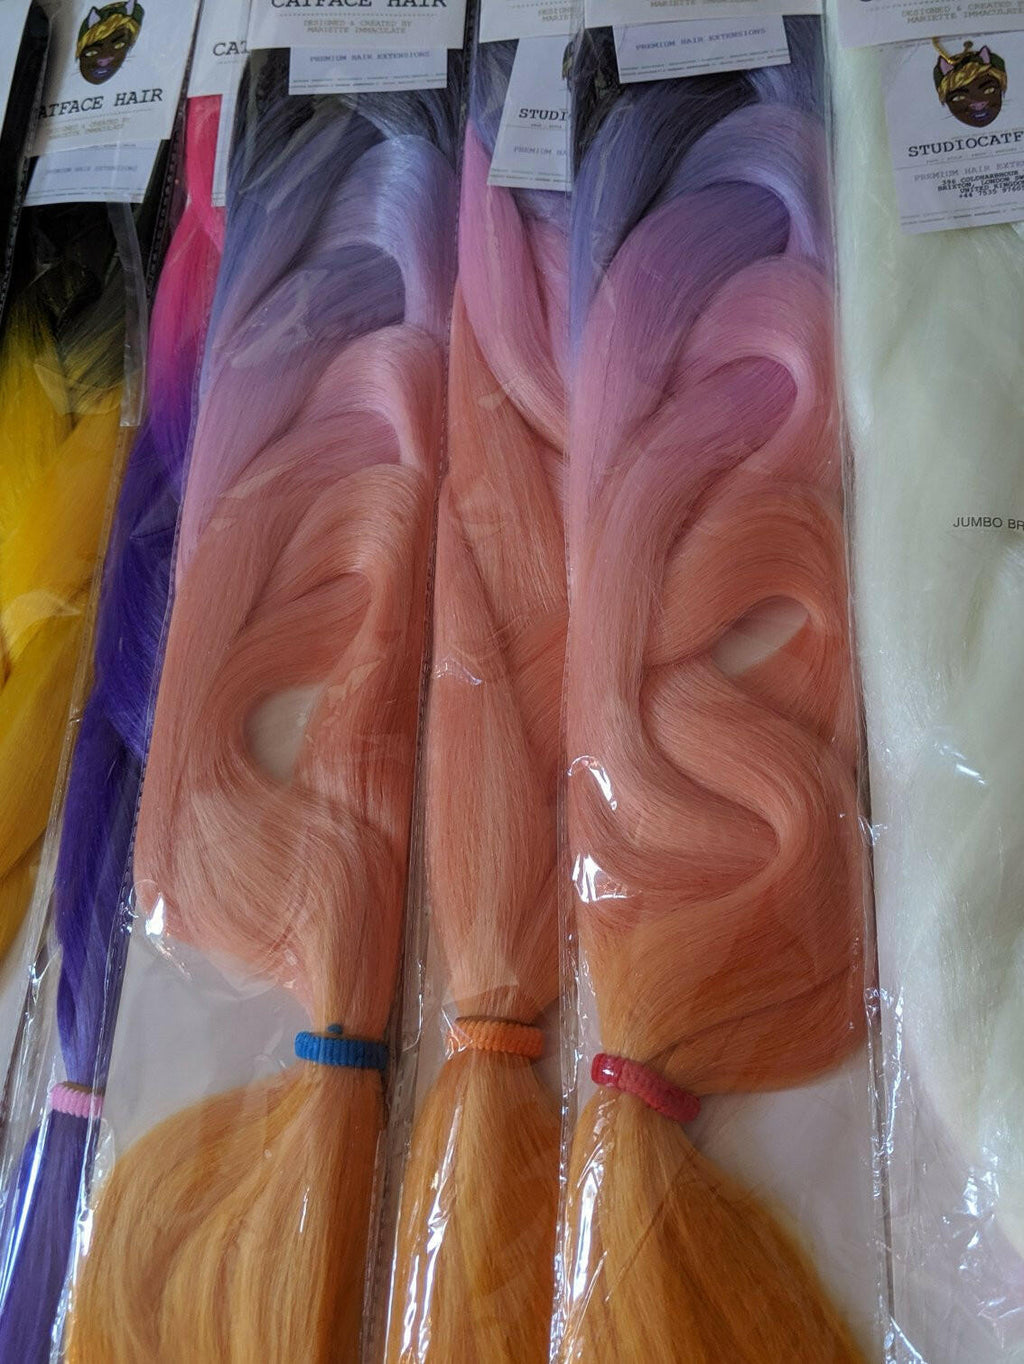 CATFACE HAIR COSMIC CANDY CRUSH OMBRE - FOUR TONE OMBE JUMBO BRAIDING HAIR  30 INCHES